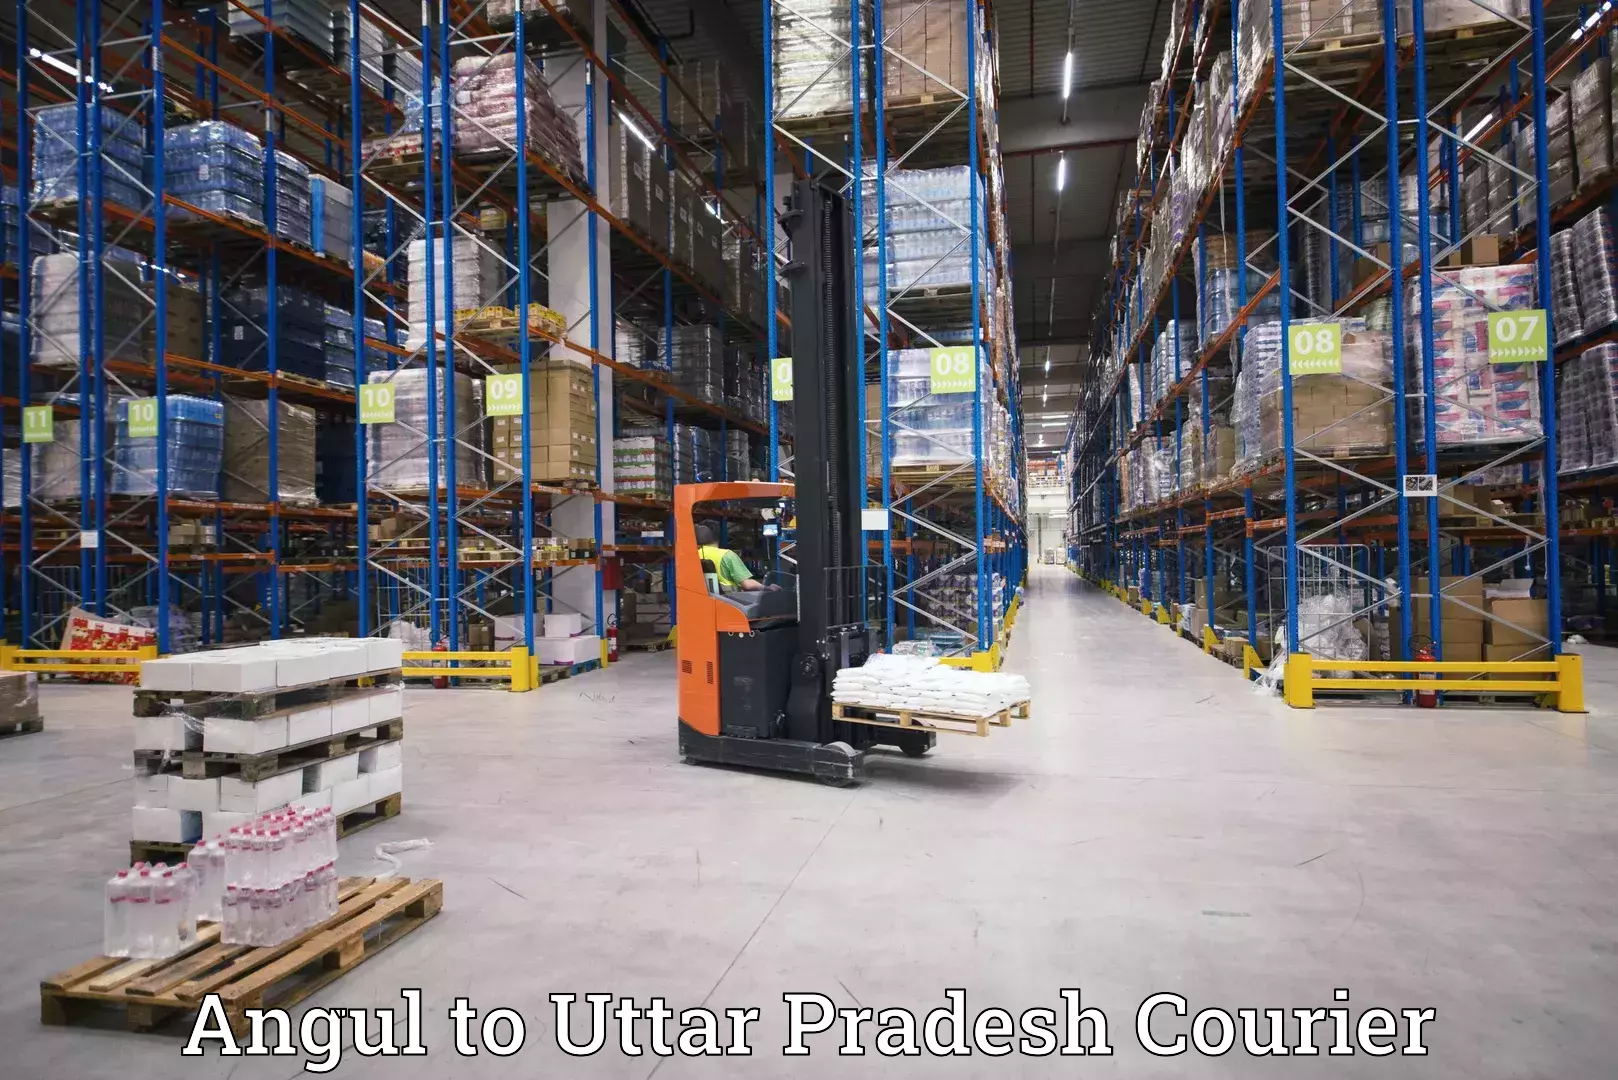 Affordable international shipping Angul to Baghpat